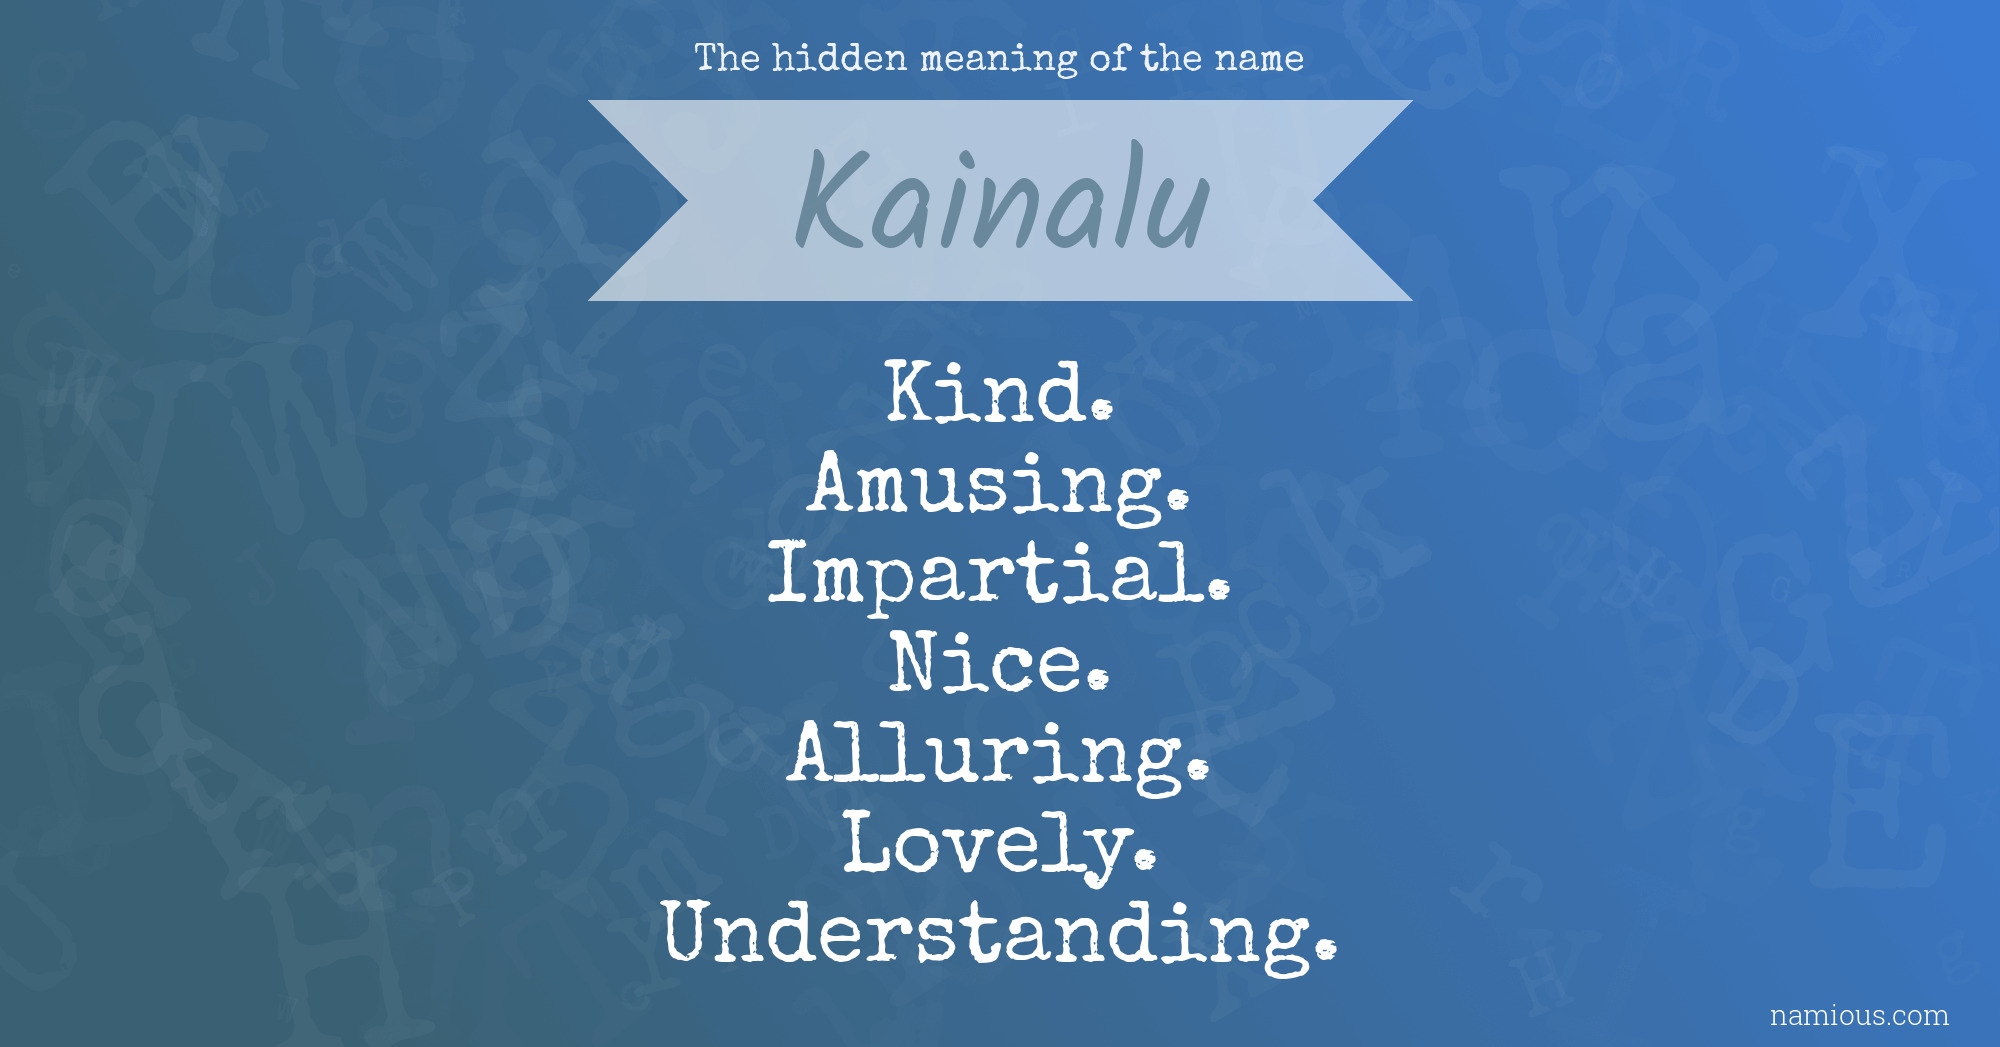 The hidden meaning of the name Kainalu